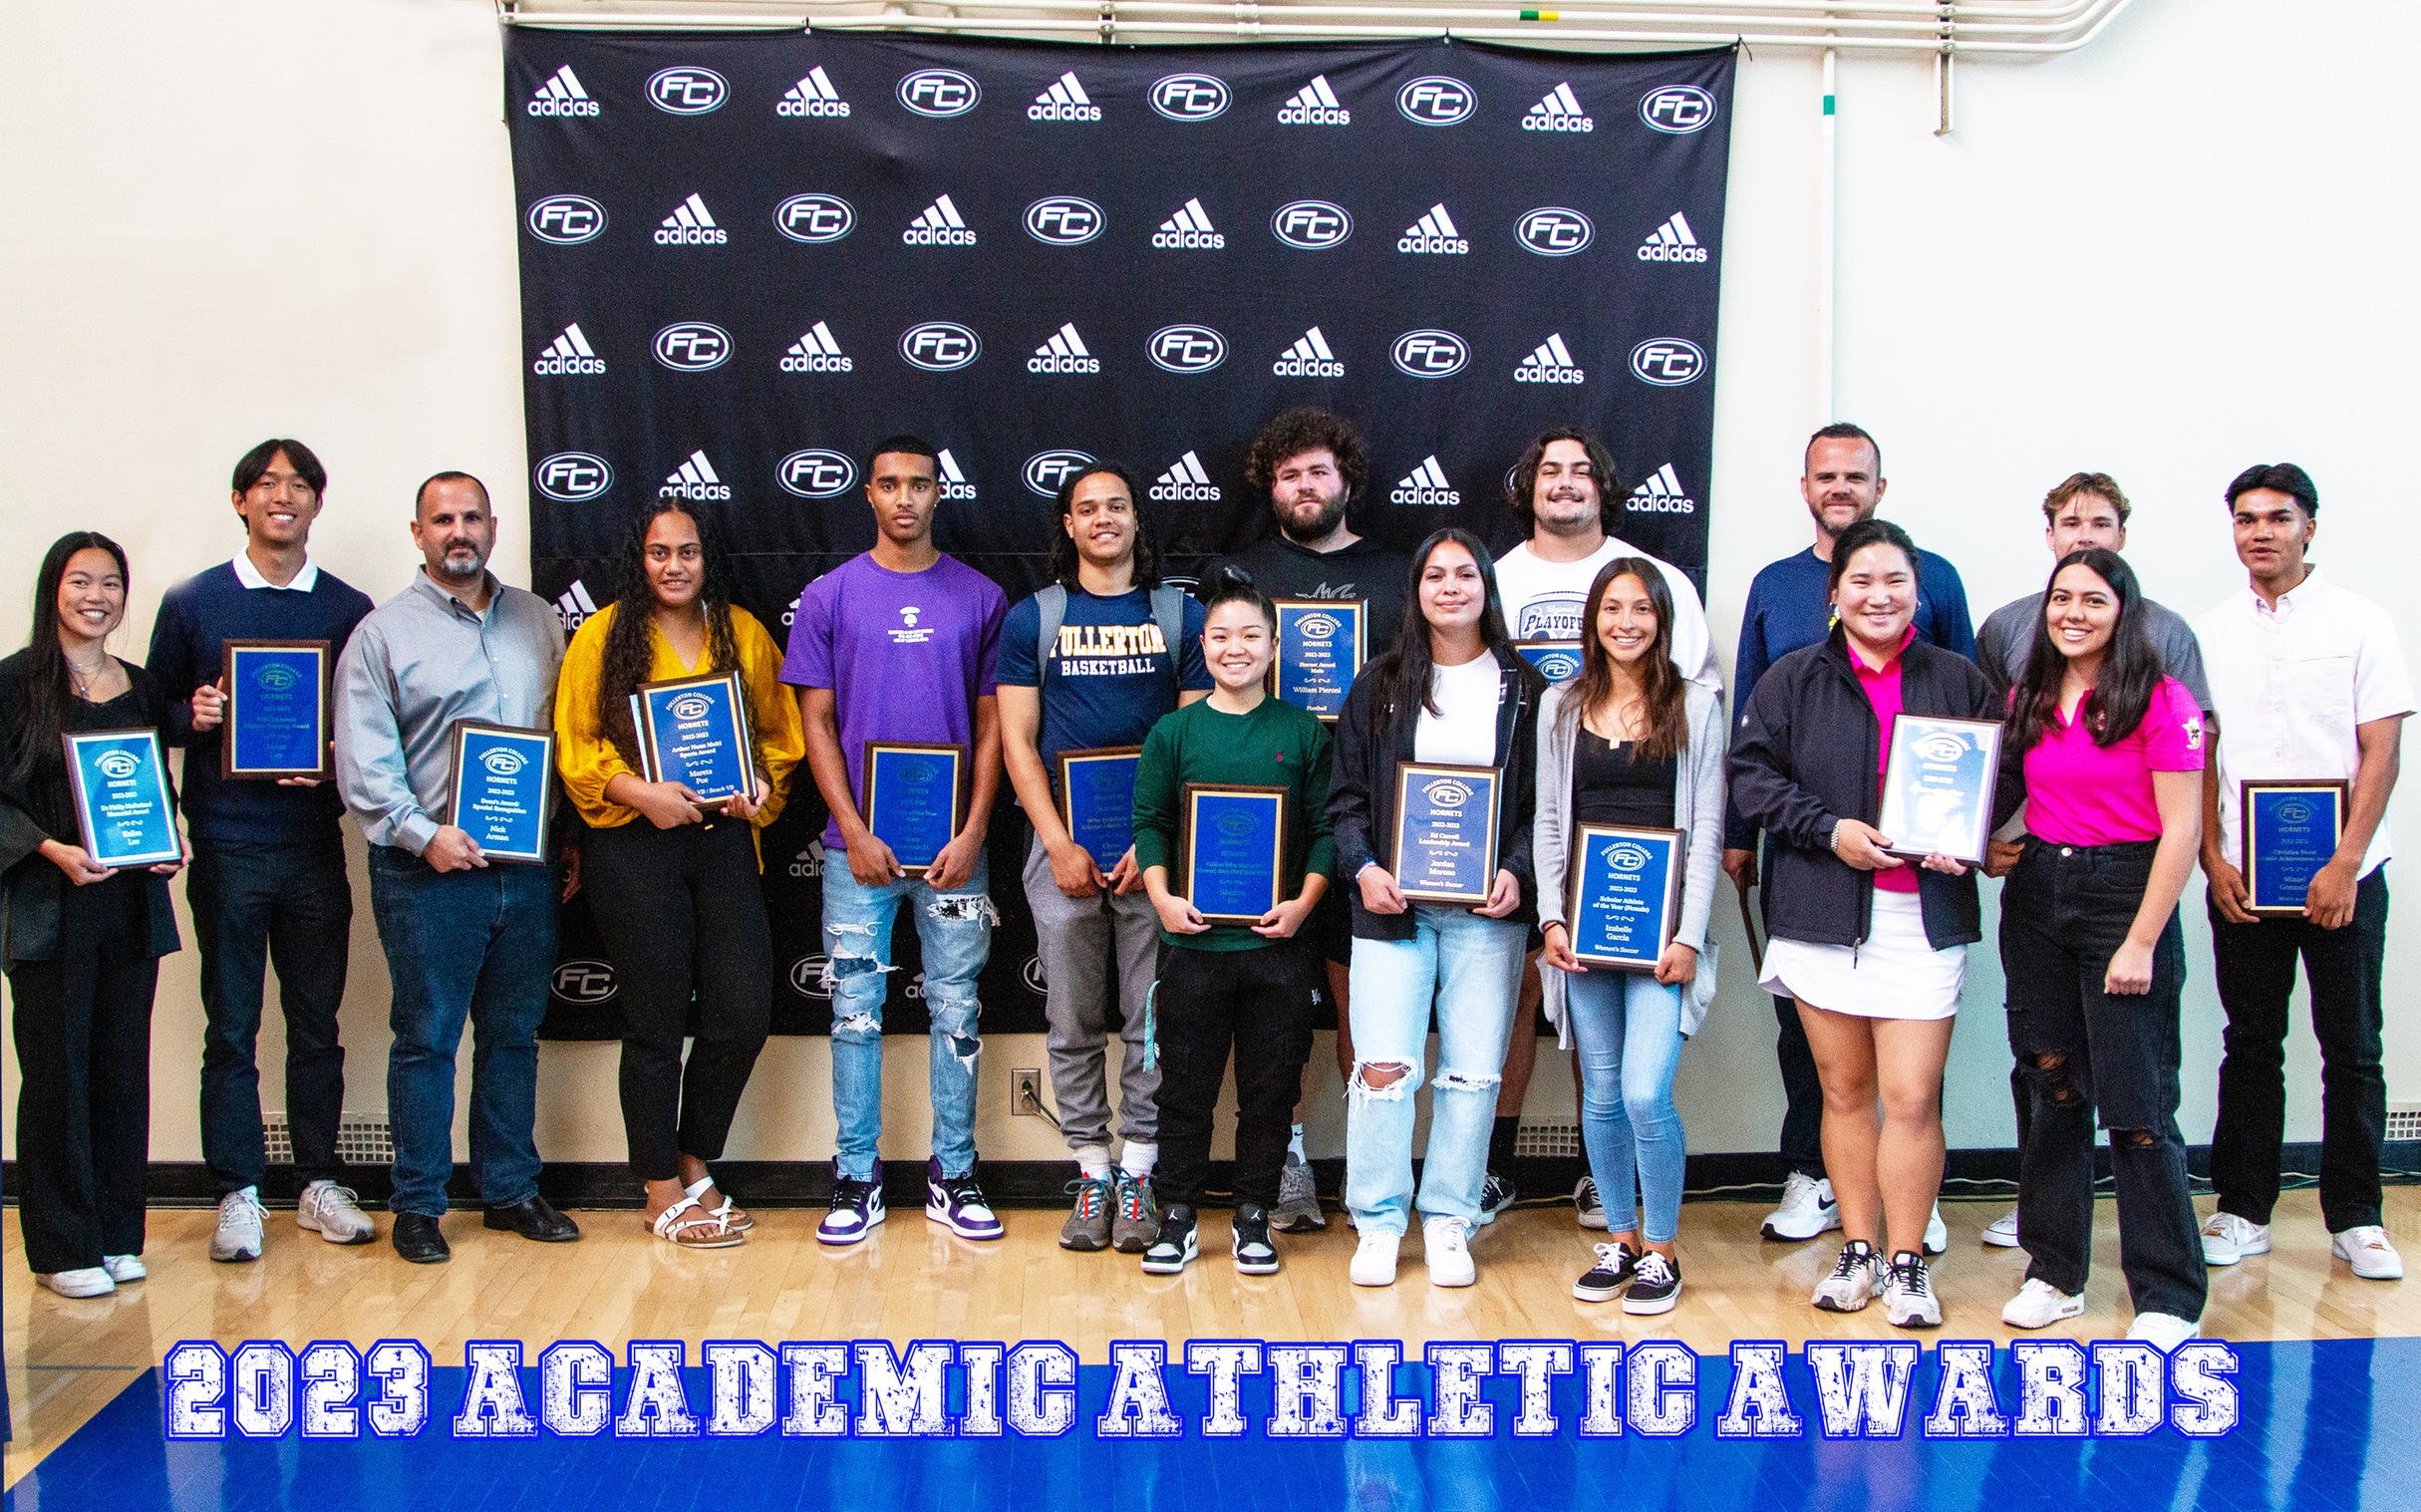 24TH ACADEMIC ATHLETIC AWARDS